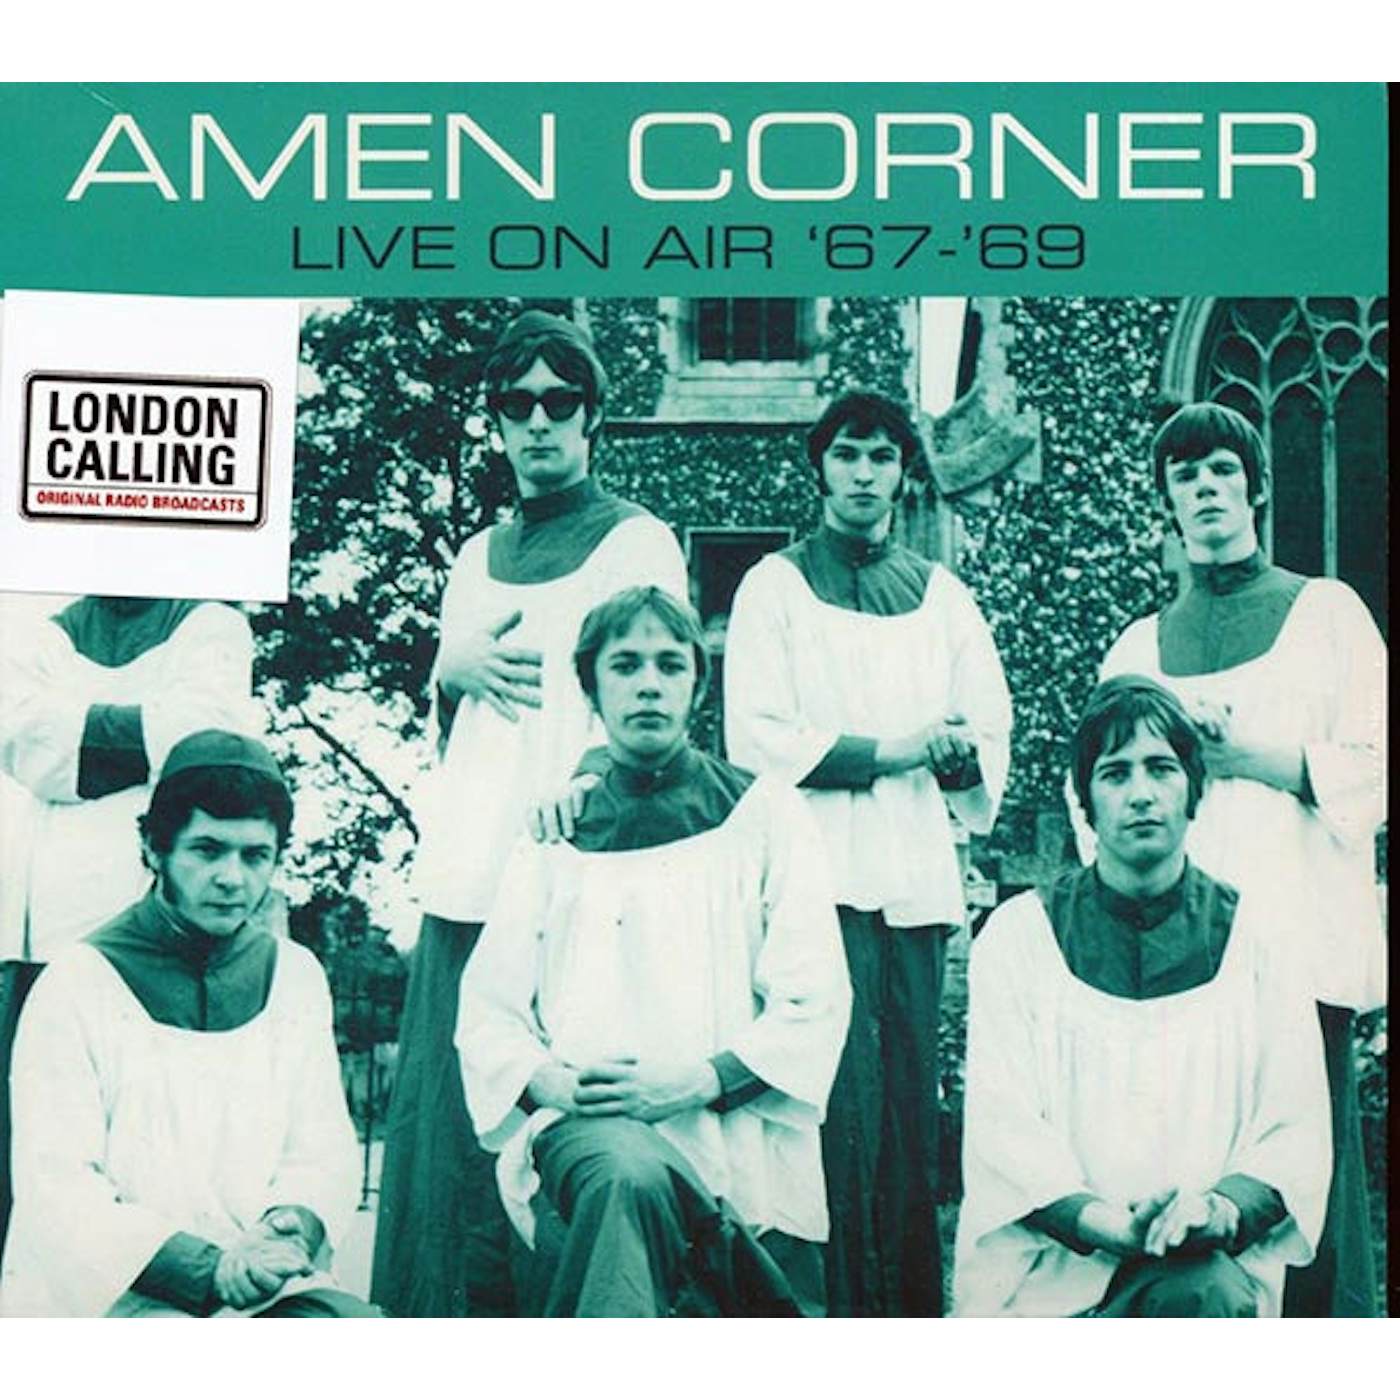 Amen Corner  CD -  Live On Air '67 '69 (incl. 8page booklet) (remastered)